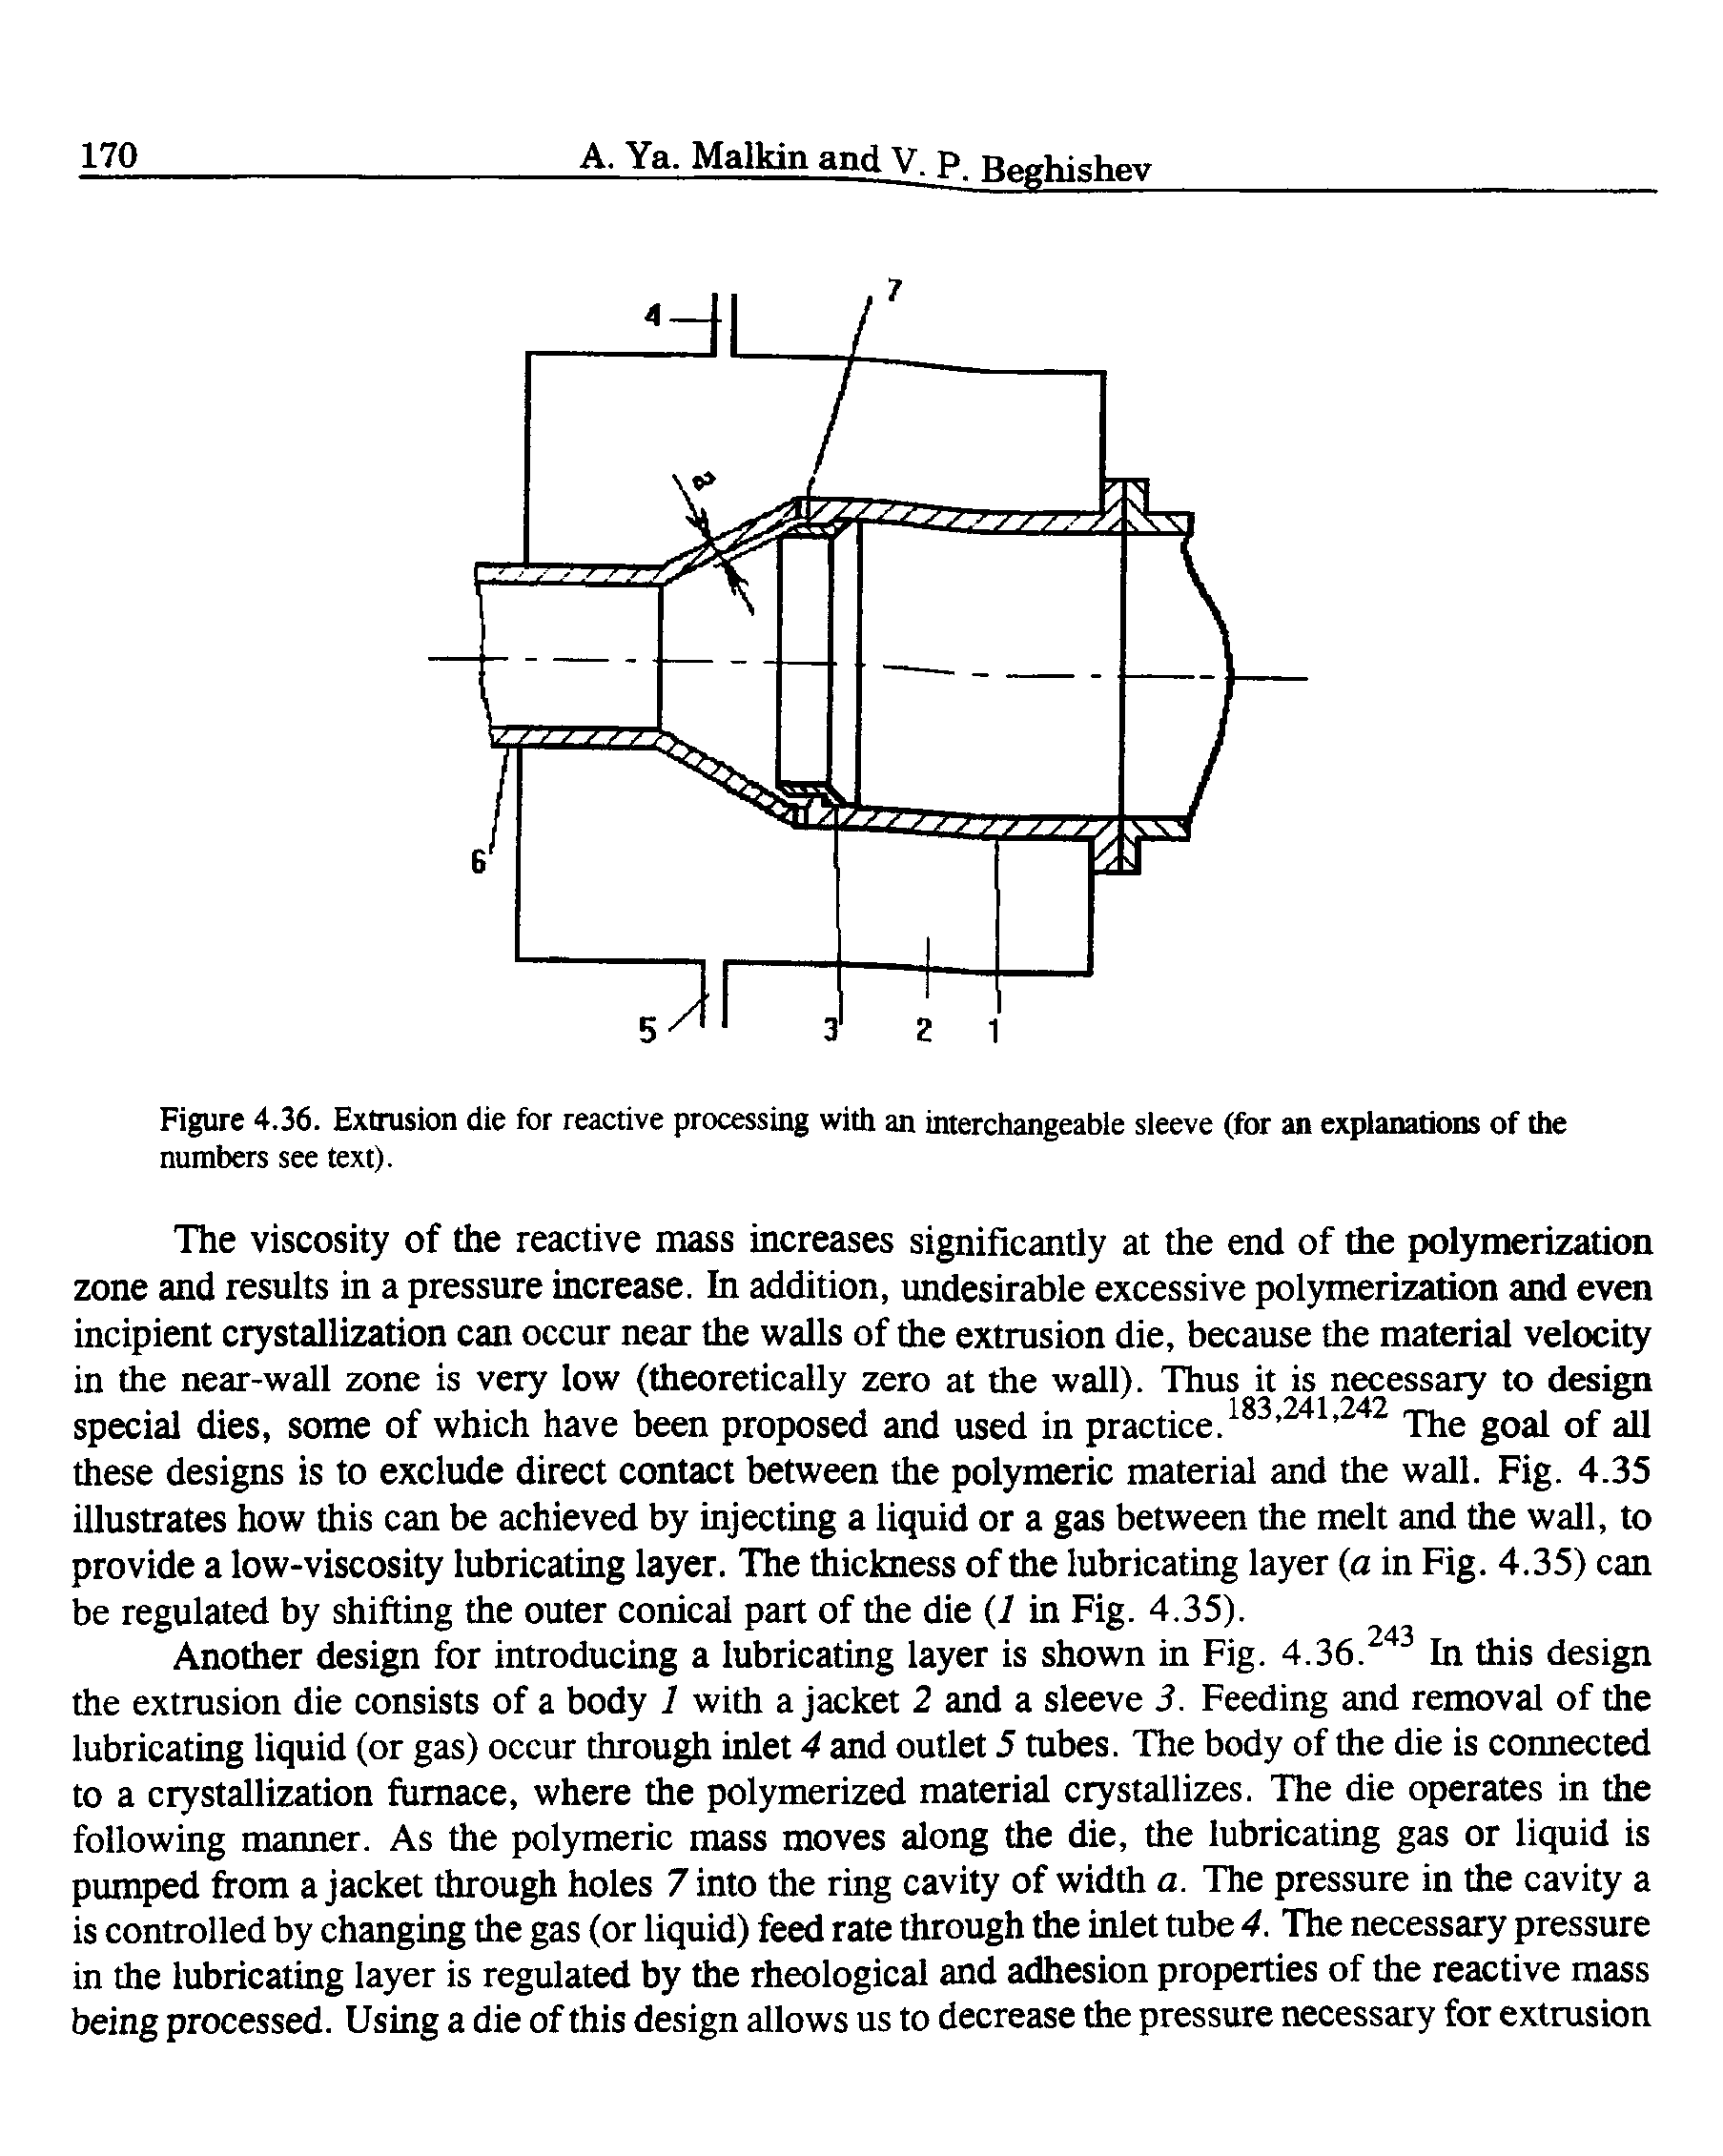 Figure 4.36. Extrusion die for reactive processing with an interchangeable sleeve (for an explanations of the numbers see text).